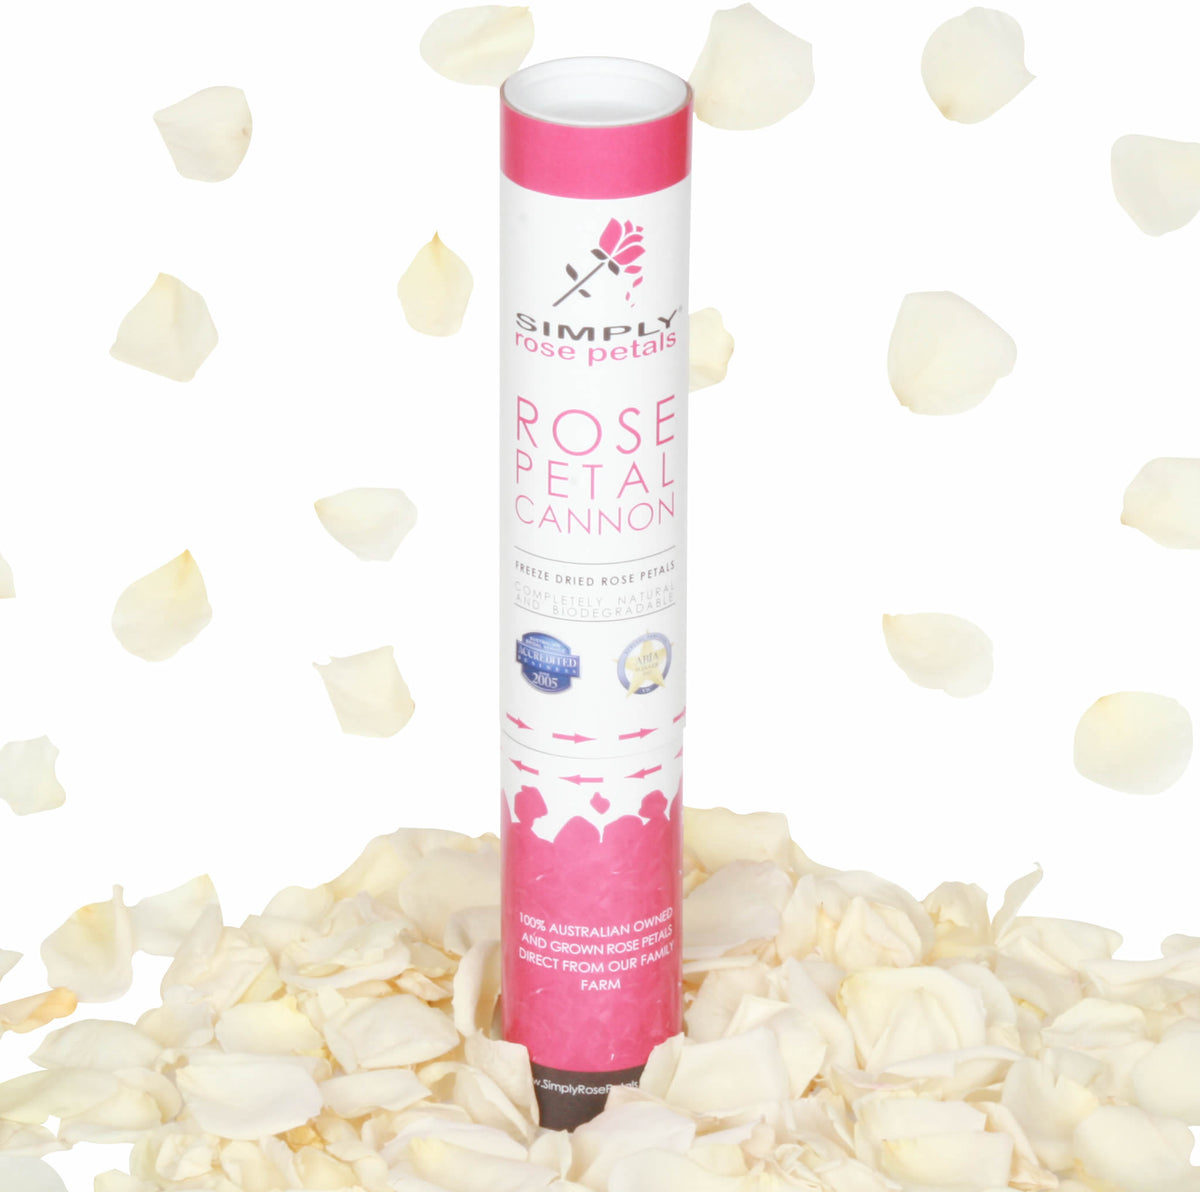 Ivory White Freeze Dried Rose Petal Cannon